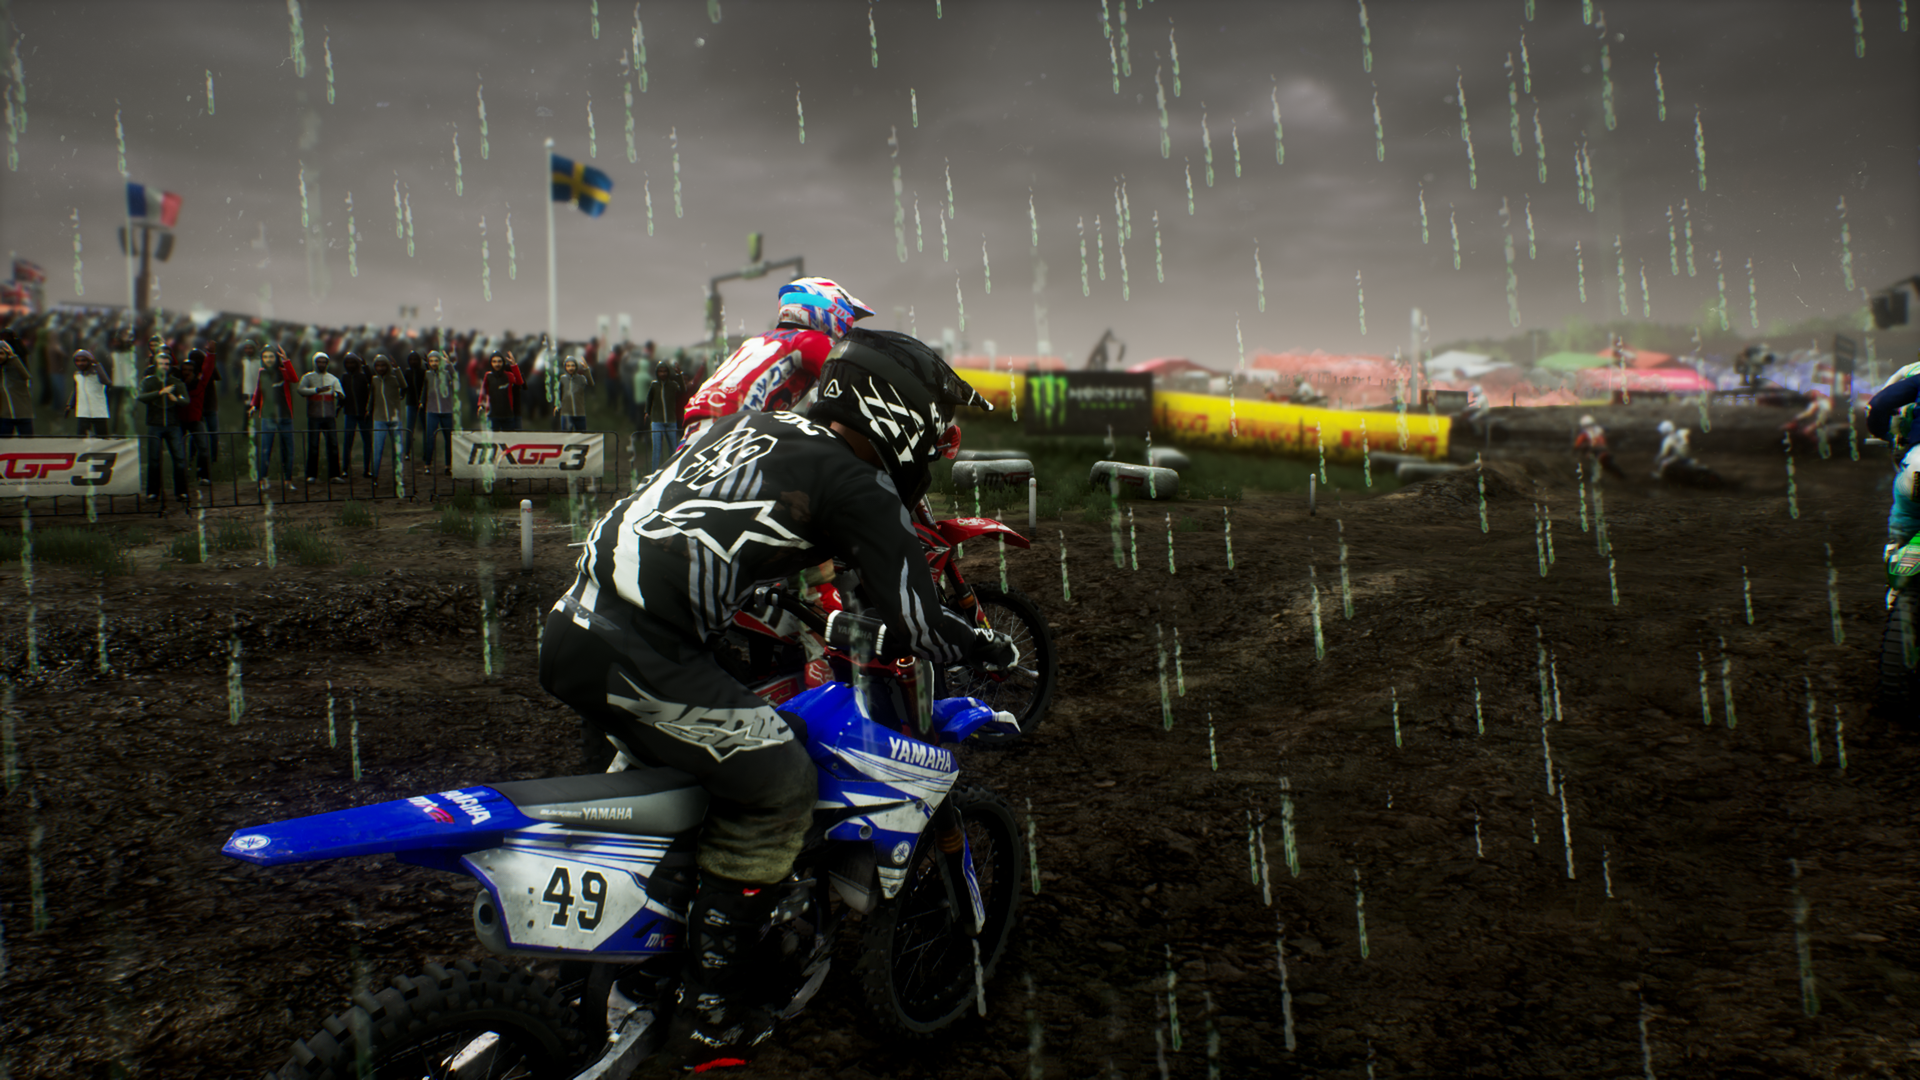 Mxgp3 The Official Motocross Videogame Review 16